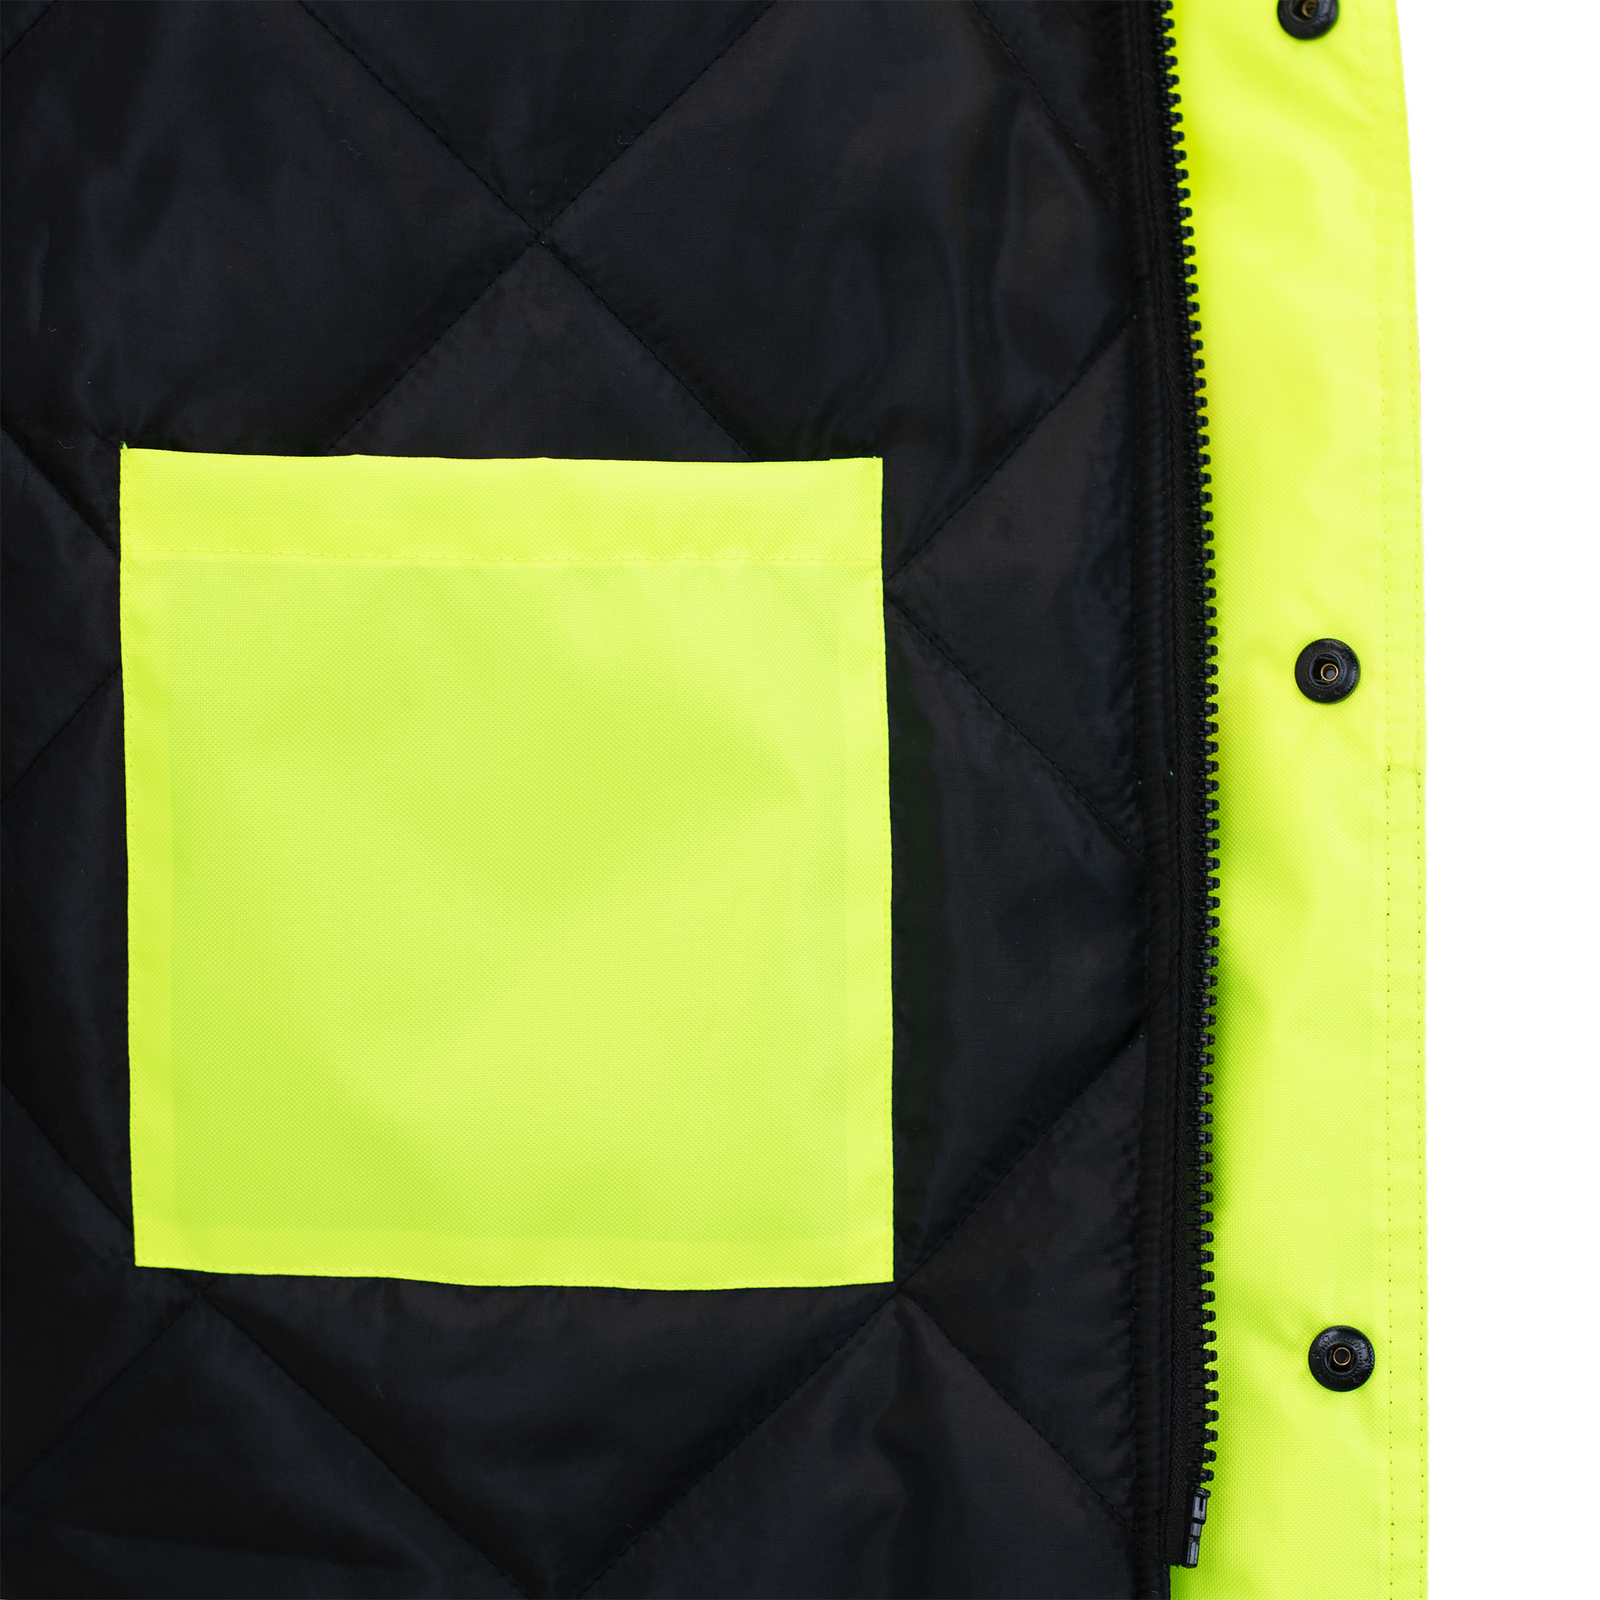 JORESTECH yellow insulated hi vis safety jacket with pockets